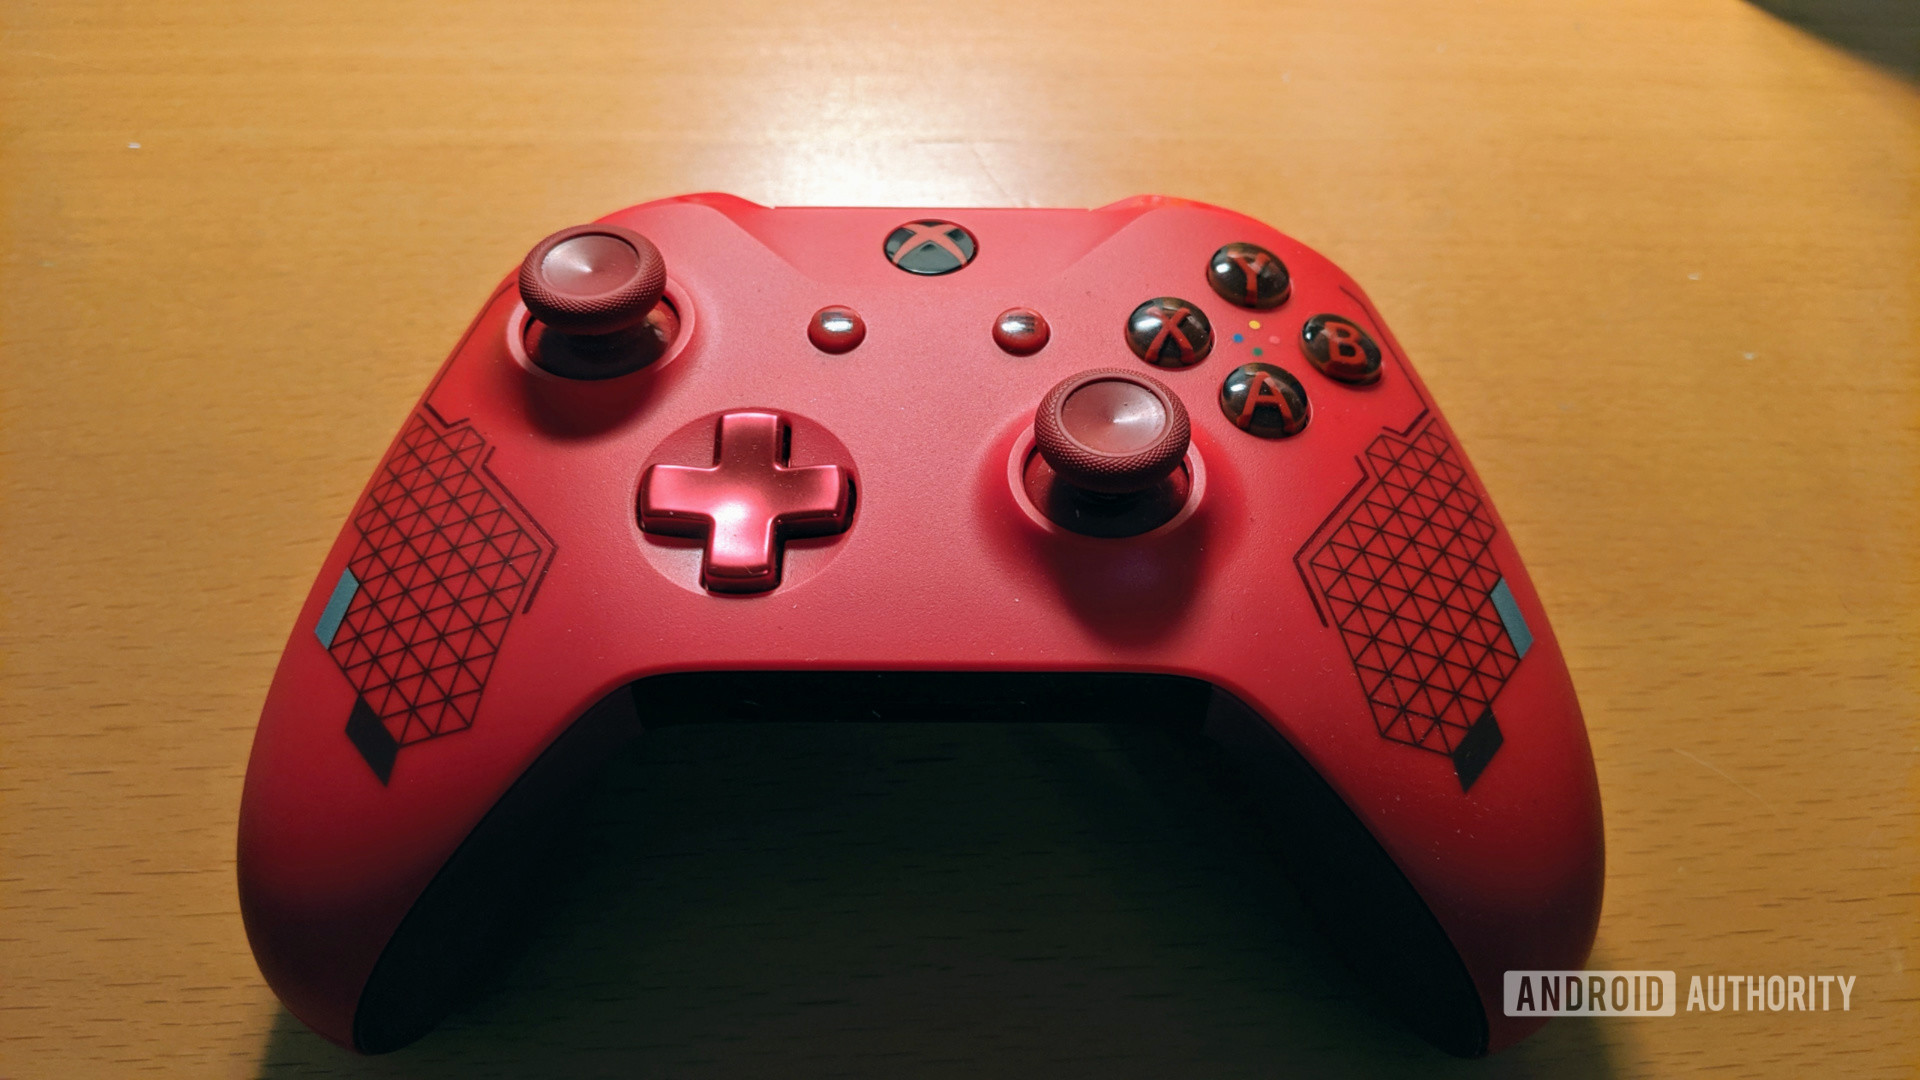 Xbox One wireless controller on a table